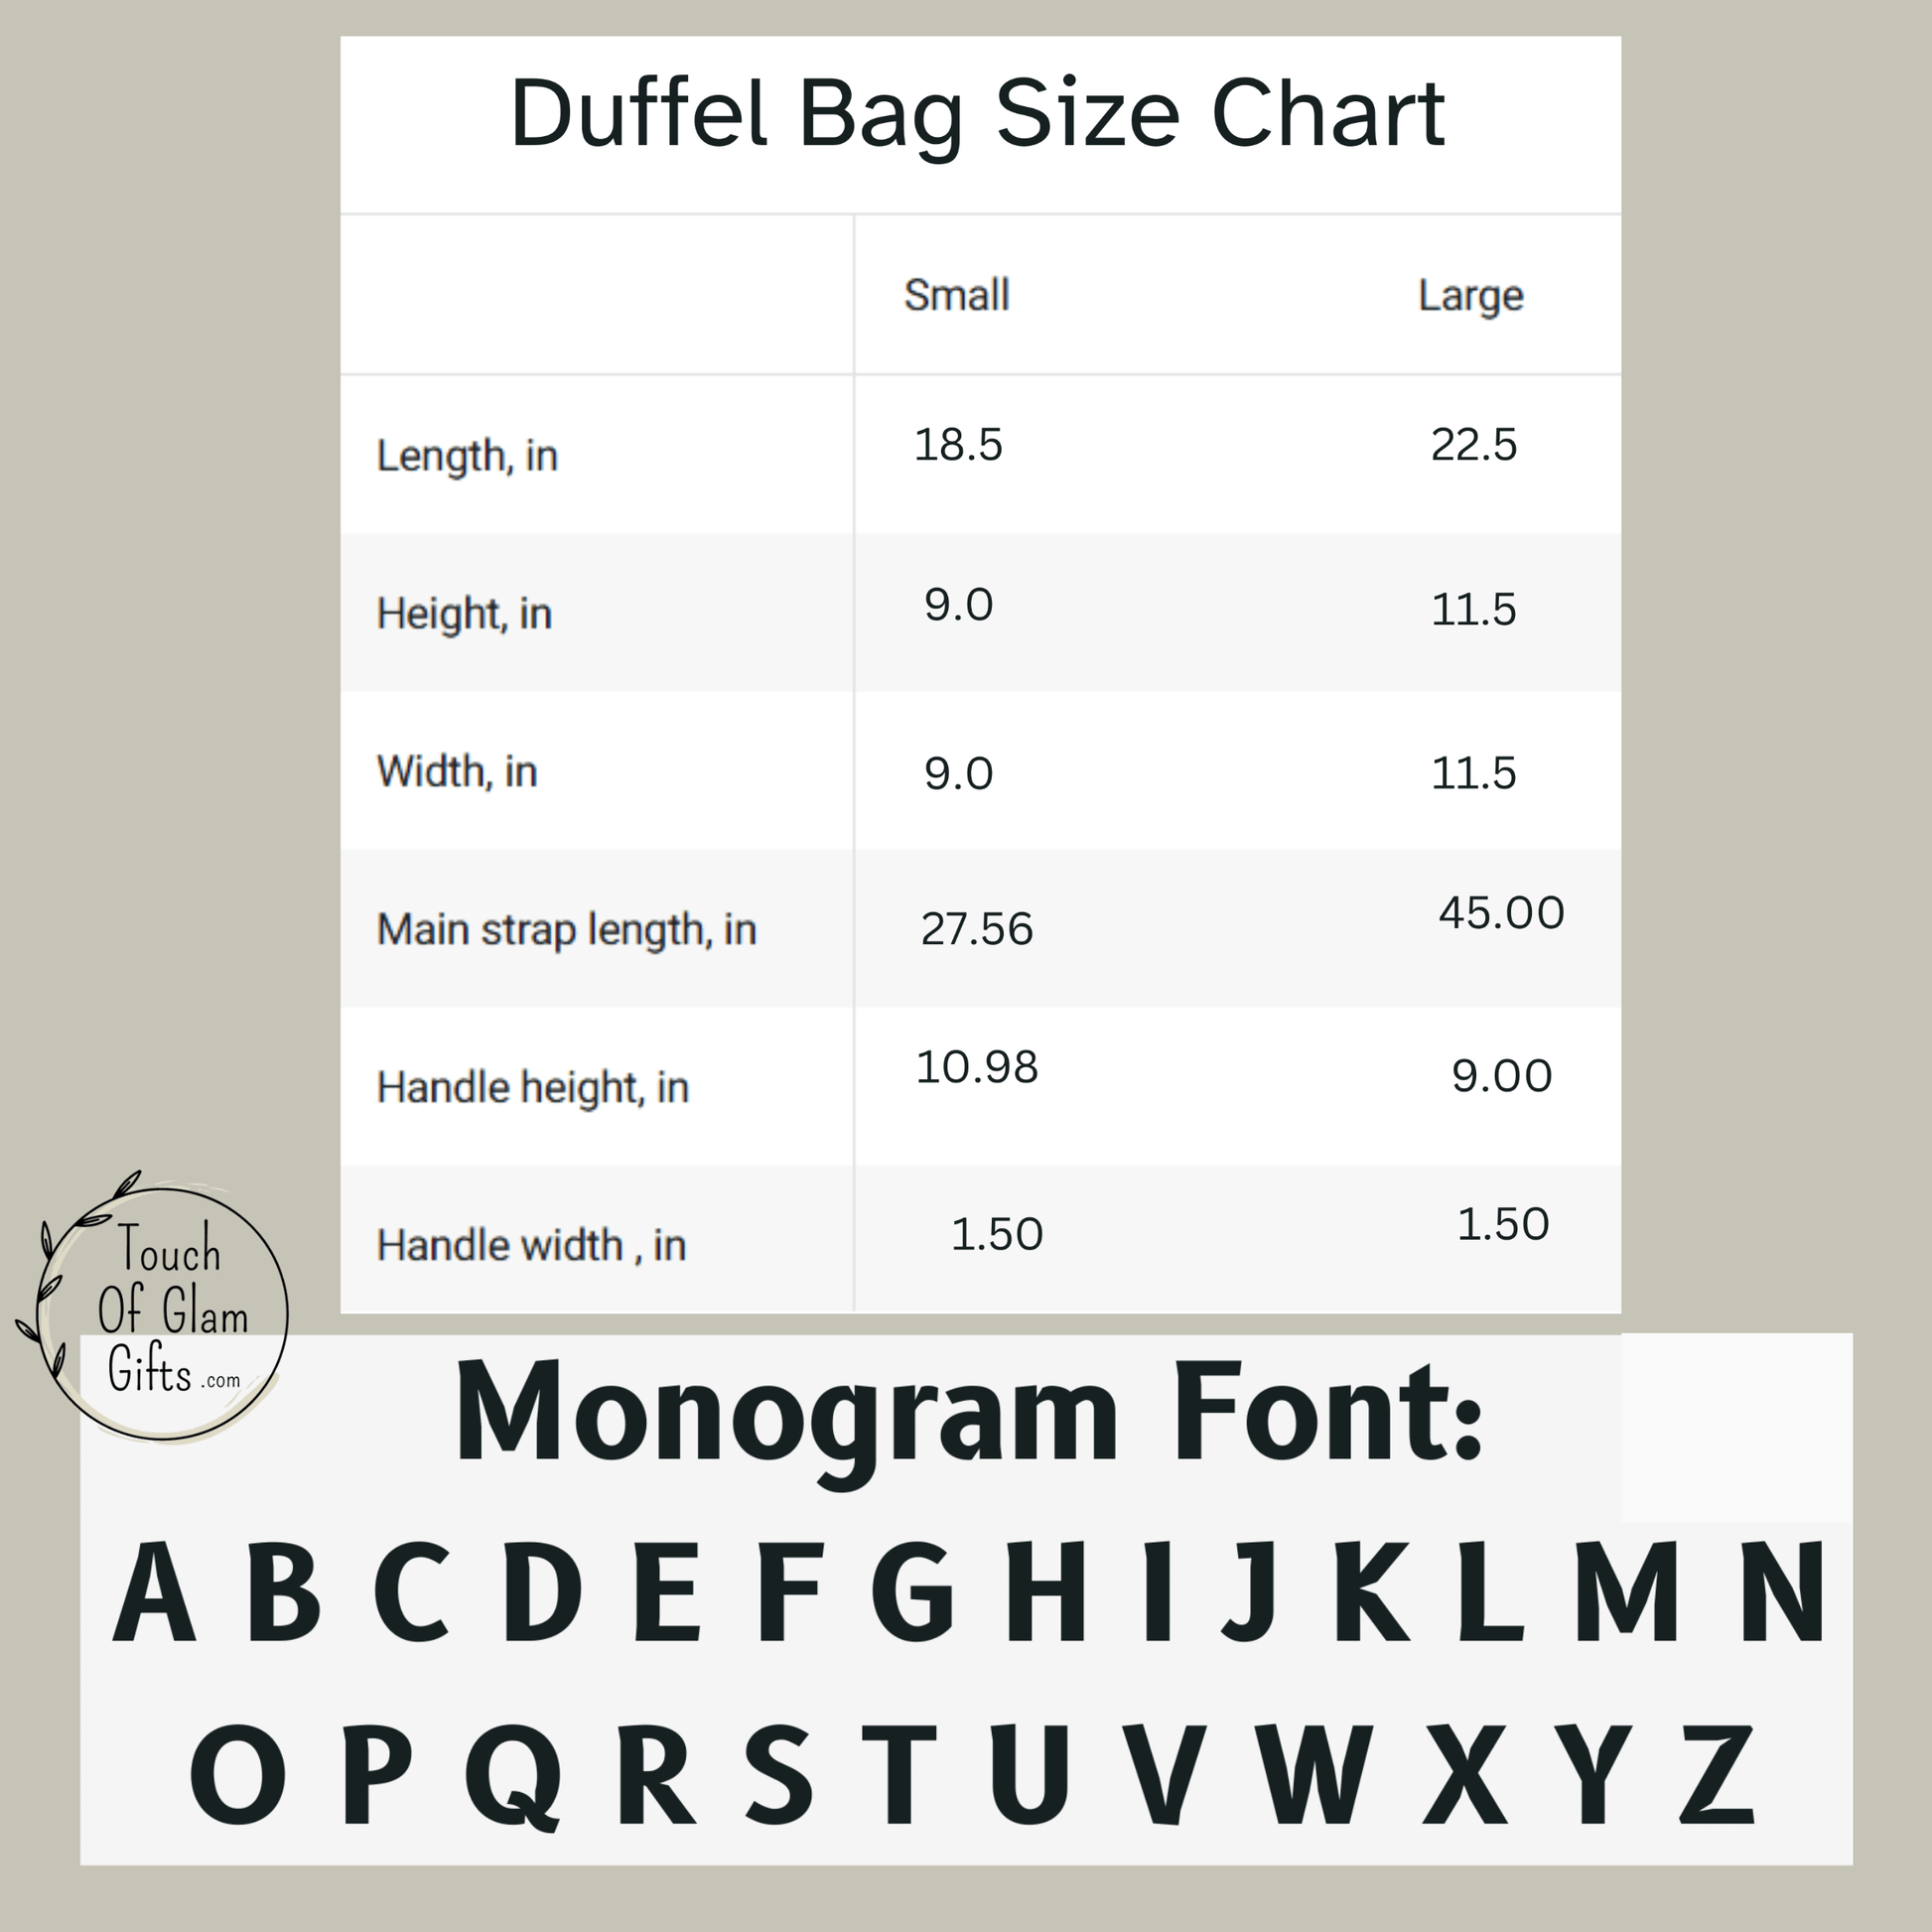 A size chart for the small and large duffel bag, along with the Monogram Font letters used for the personalization of the travel bag.